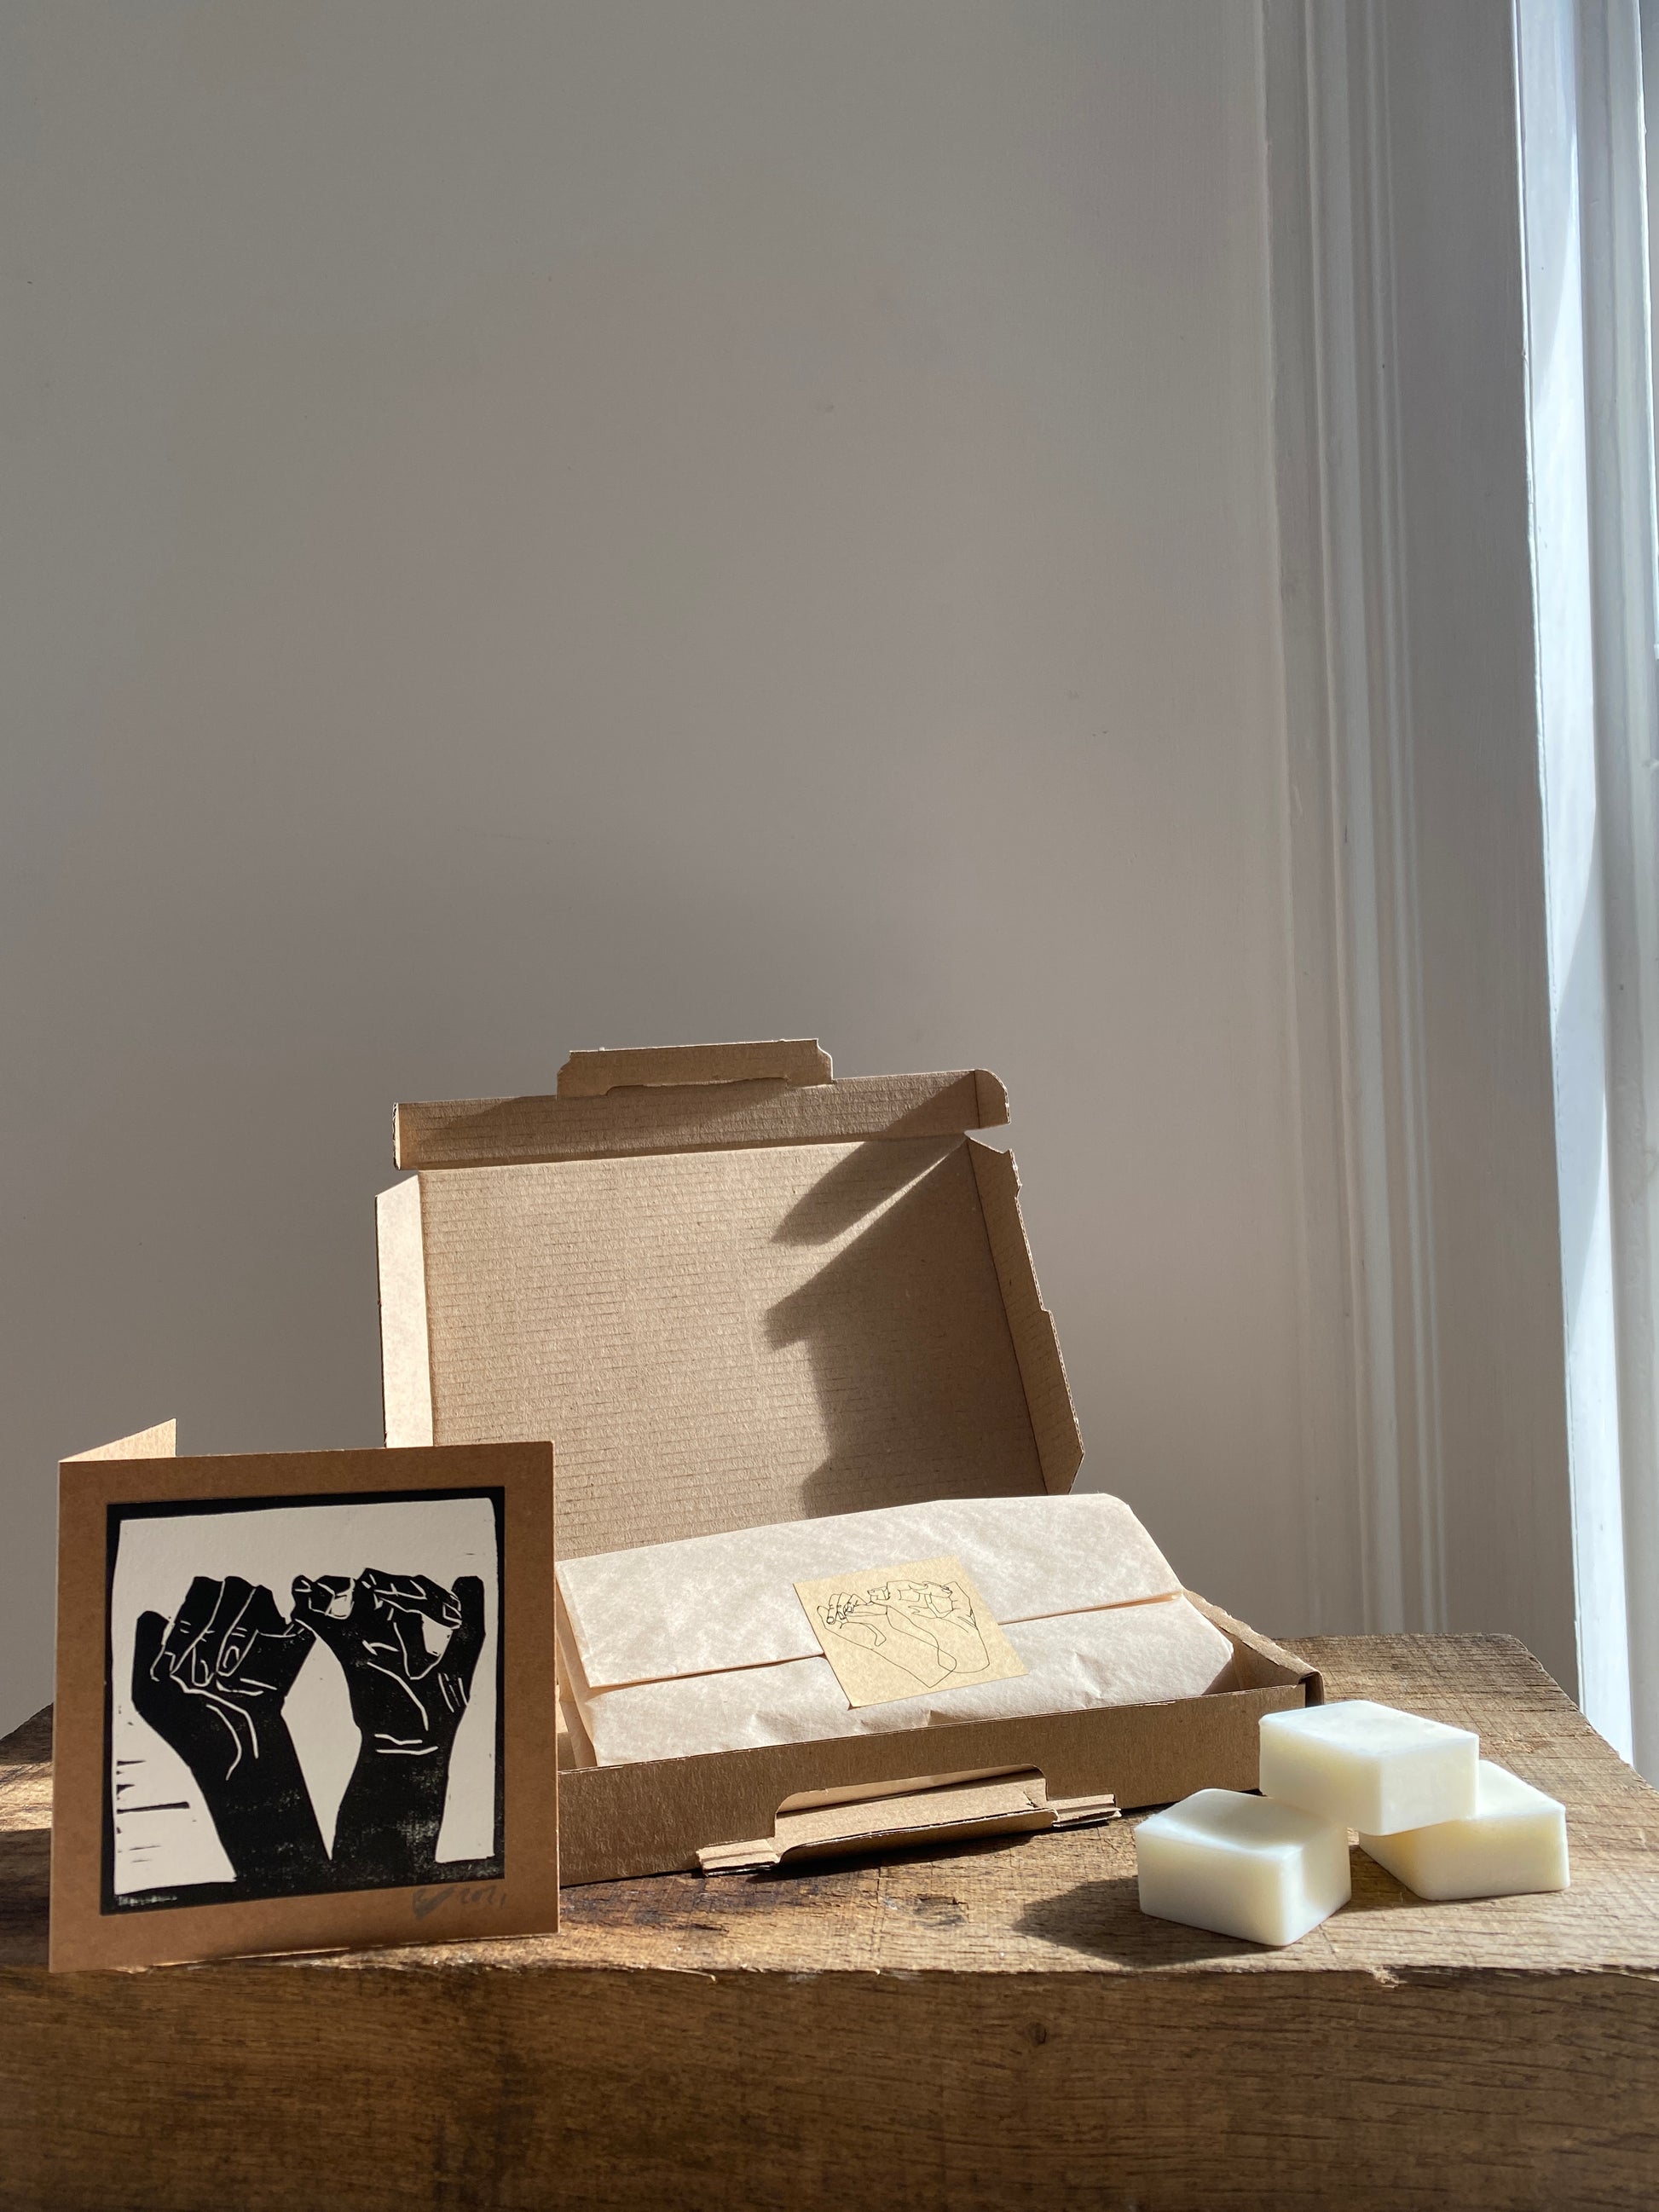 Founded in Hackney, Bouclé soy wax melts alongside a hand printed card making it the perfect gift to send straight to the recipient.